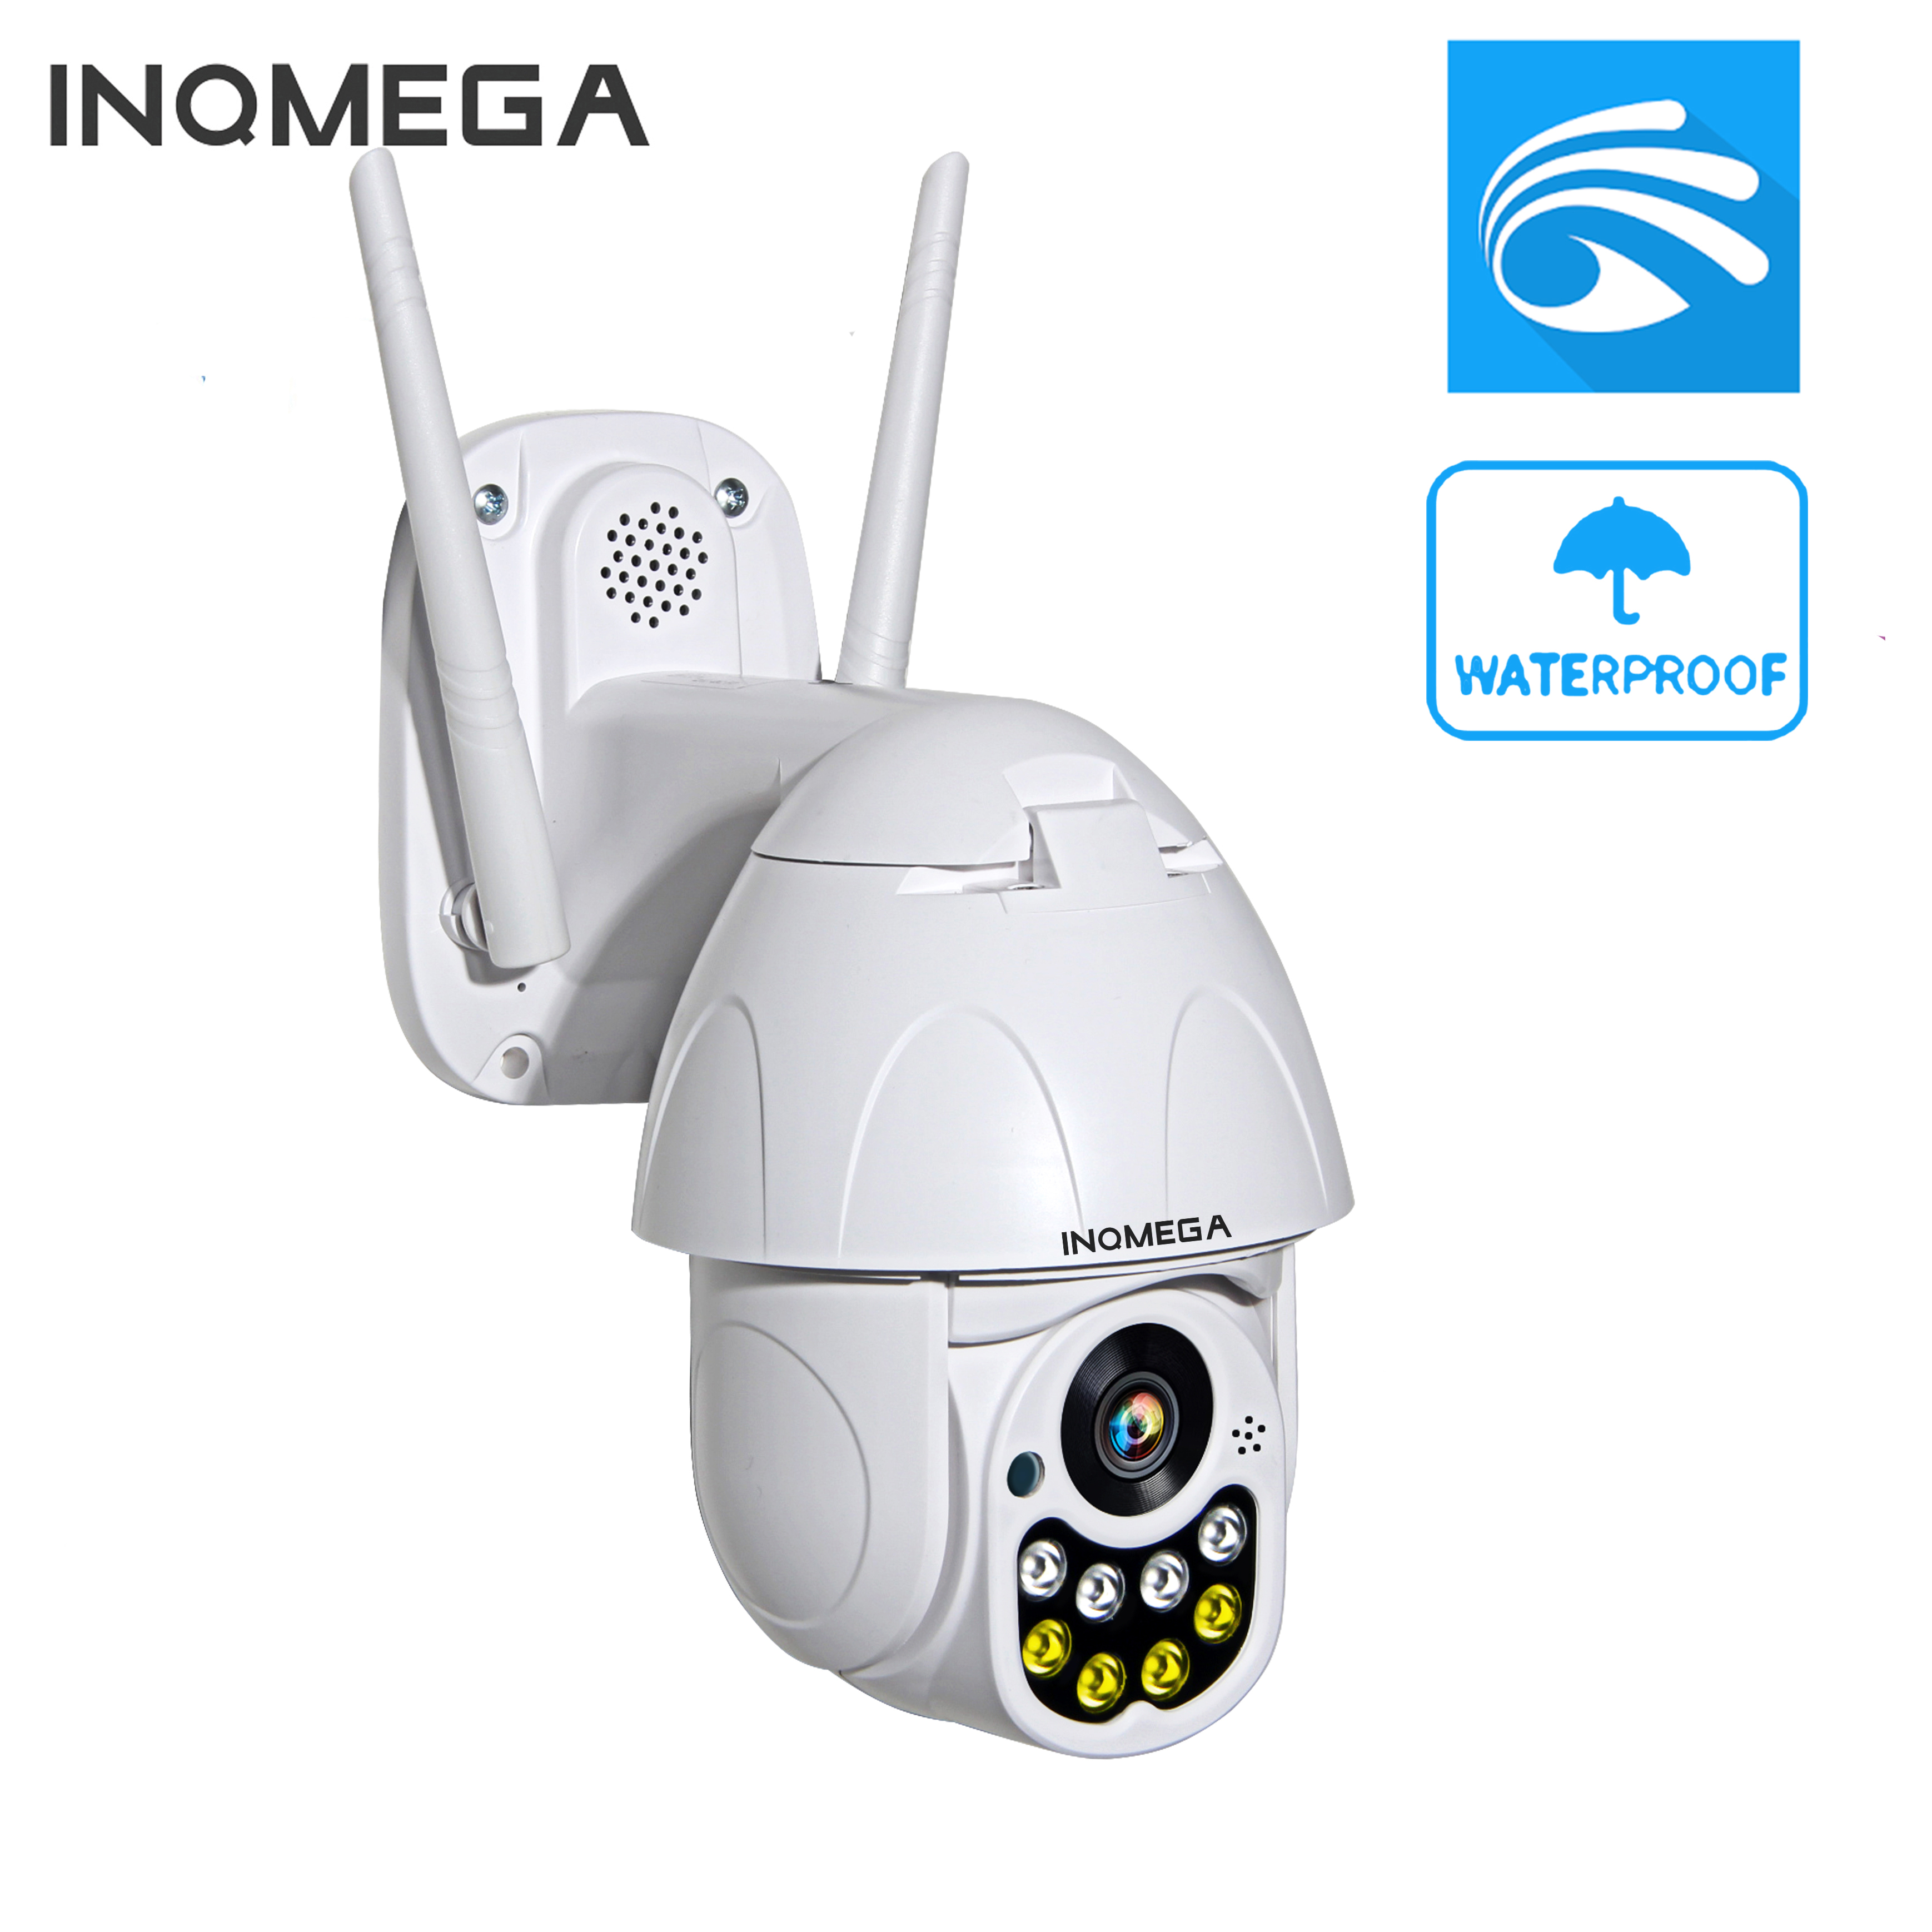 

INQMEGA HD 1080P Waterproof 2.5inch 8LED IP Camera H.264 Color Night Version Motion-Detection 360° Home Security WiFi Camera Baby Monitors